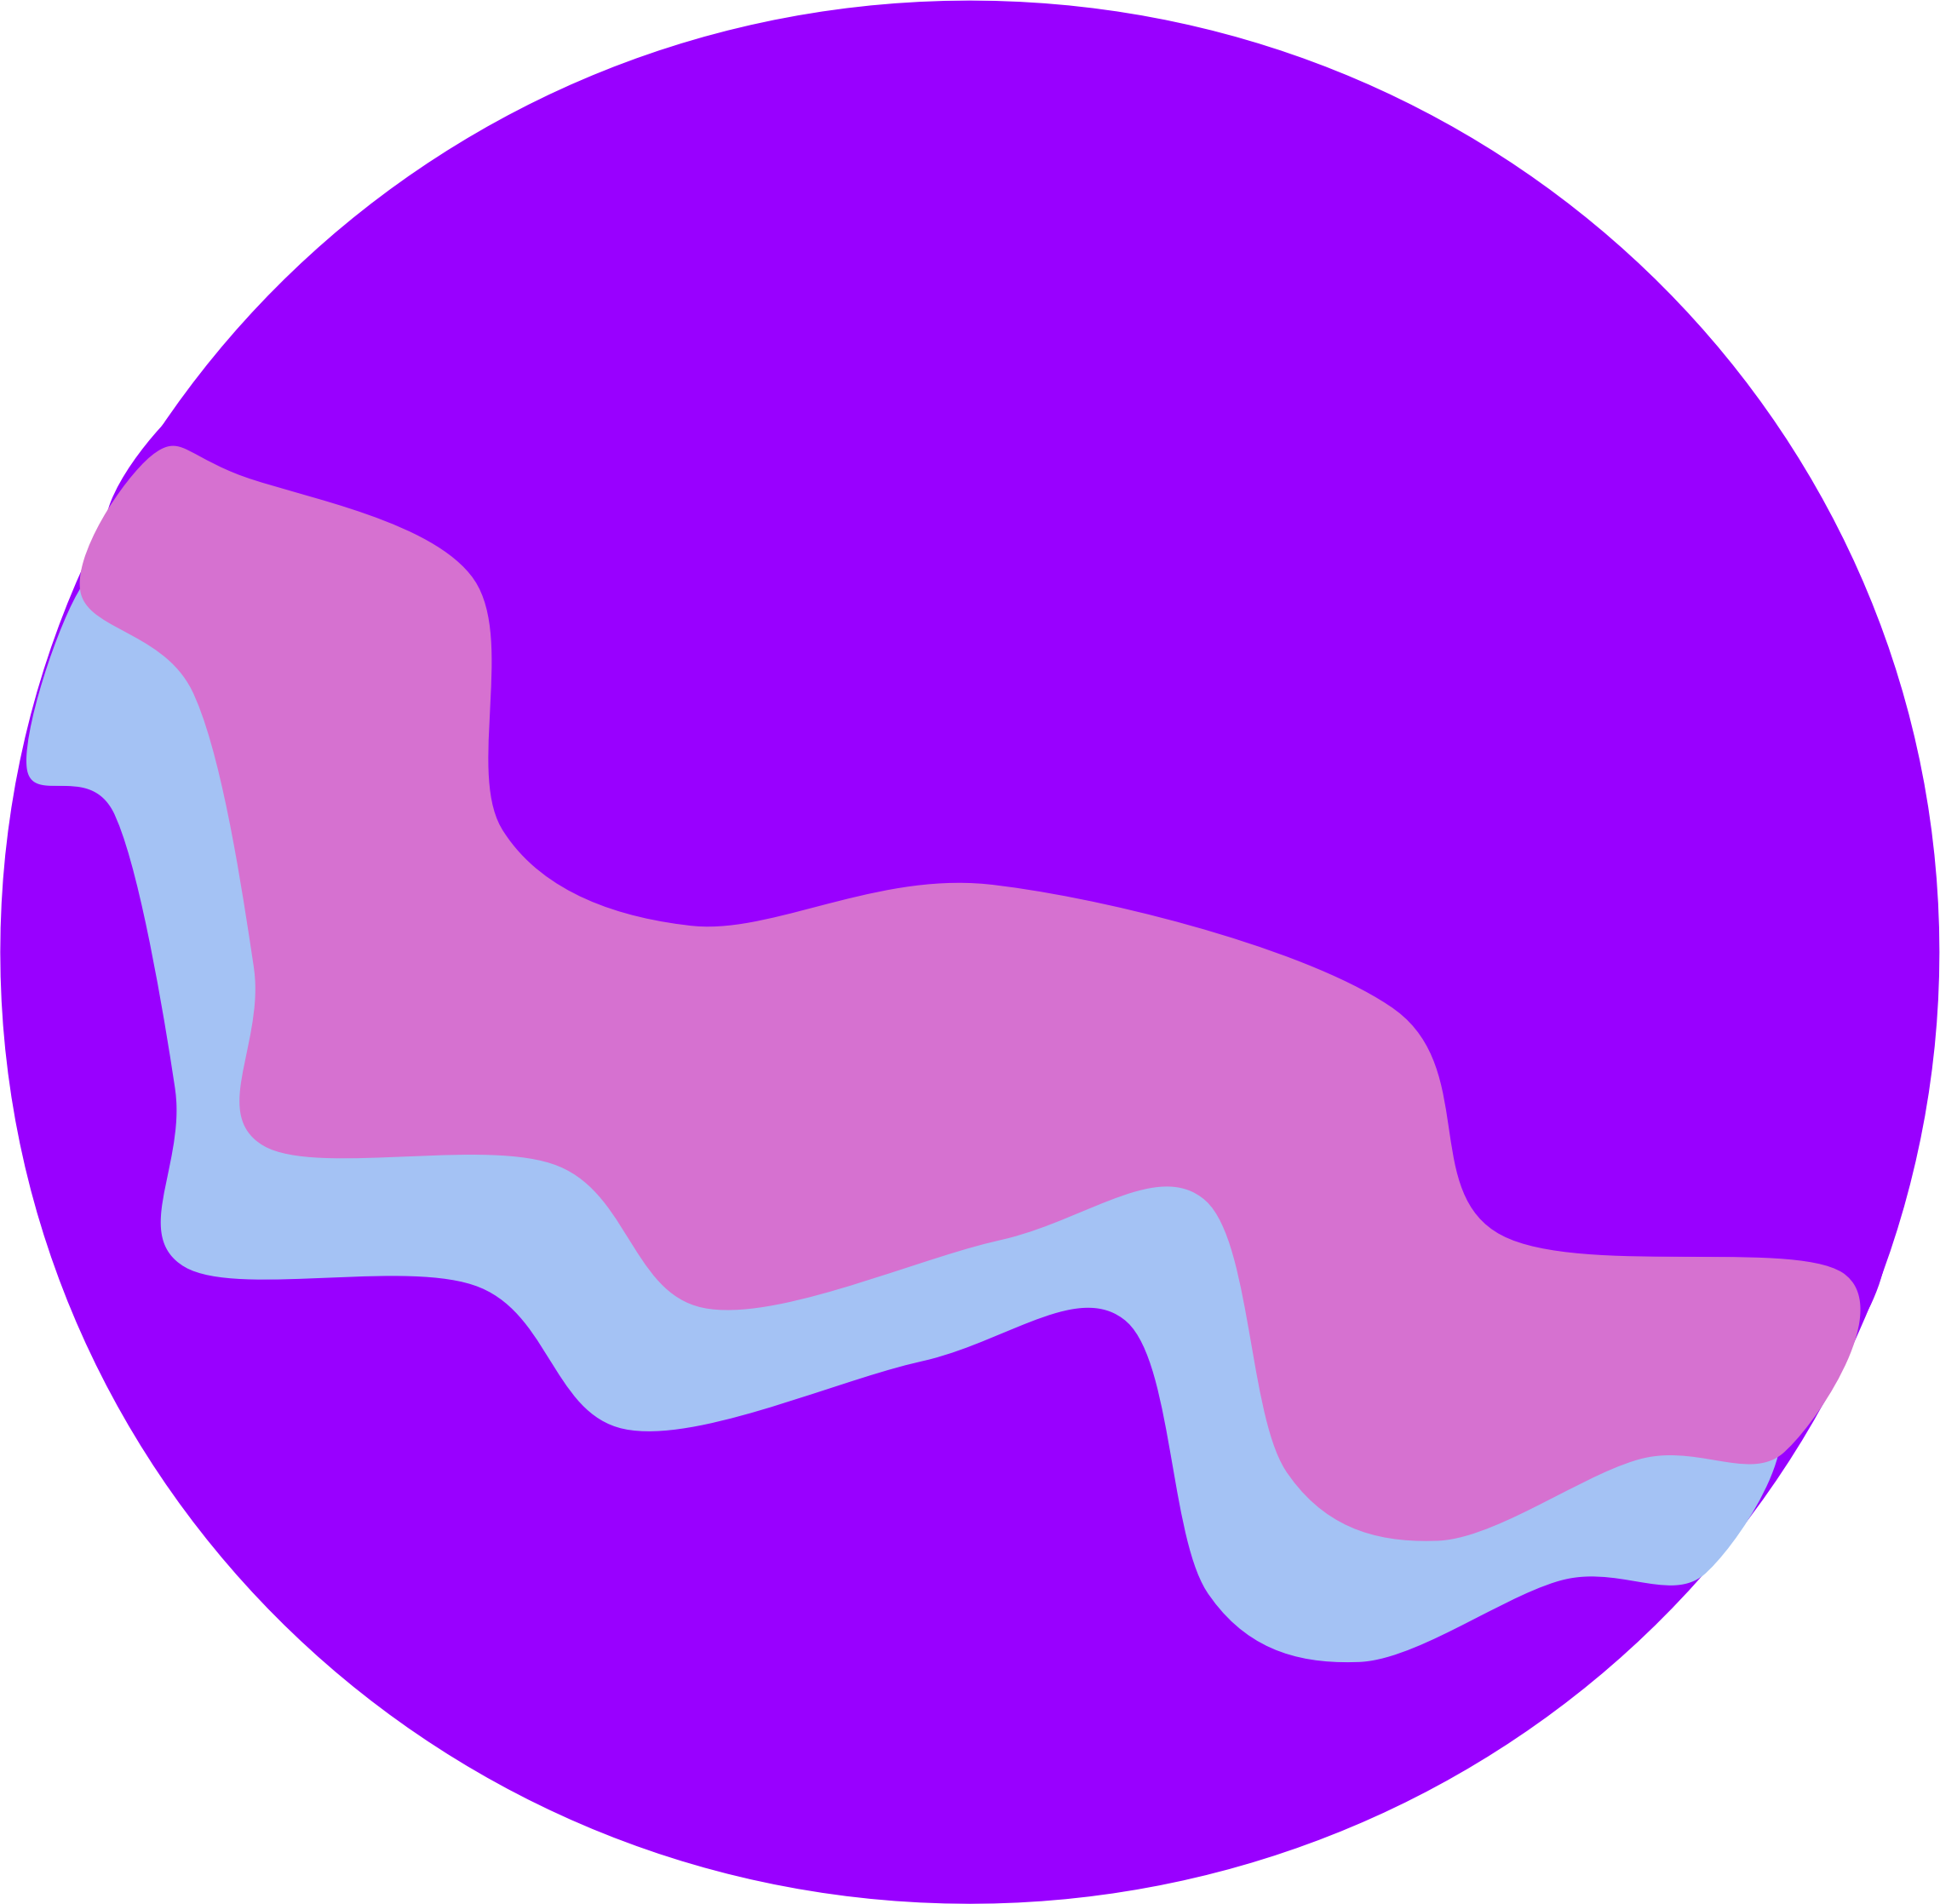 A Purple Circle With Pink And Blue Lines